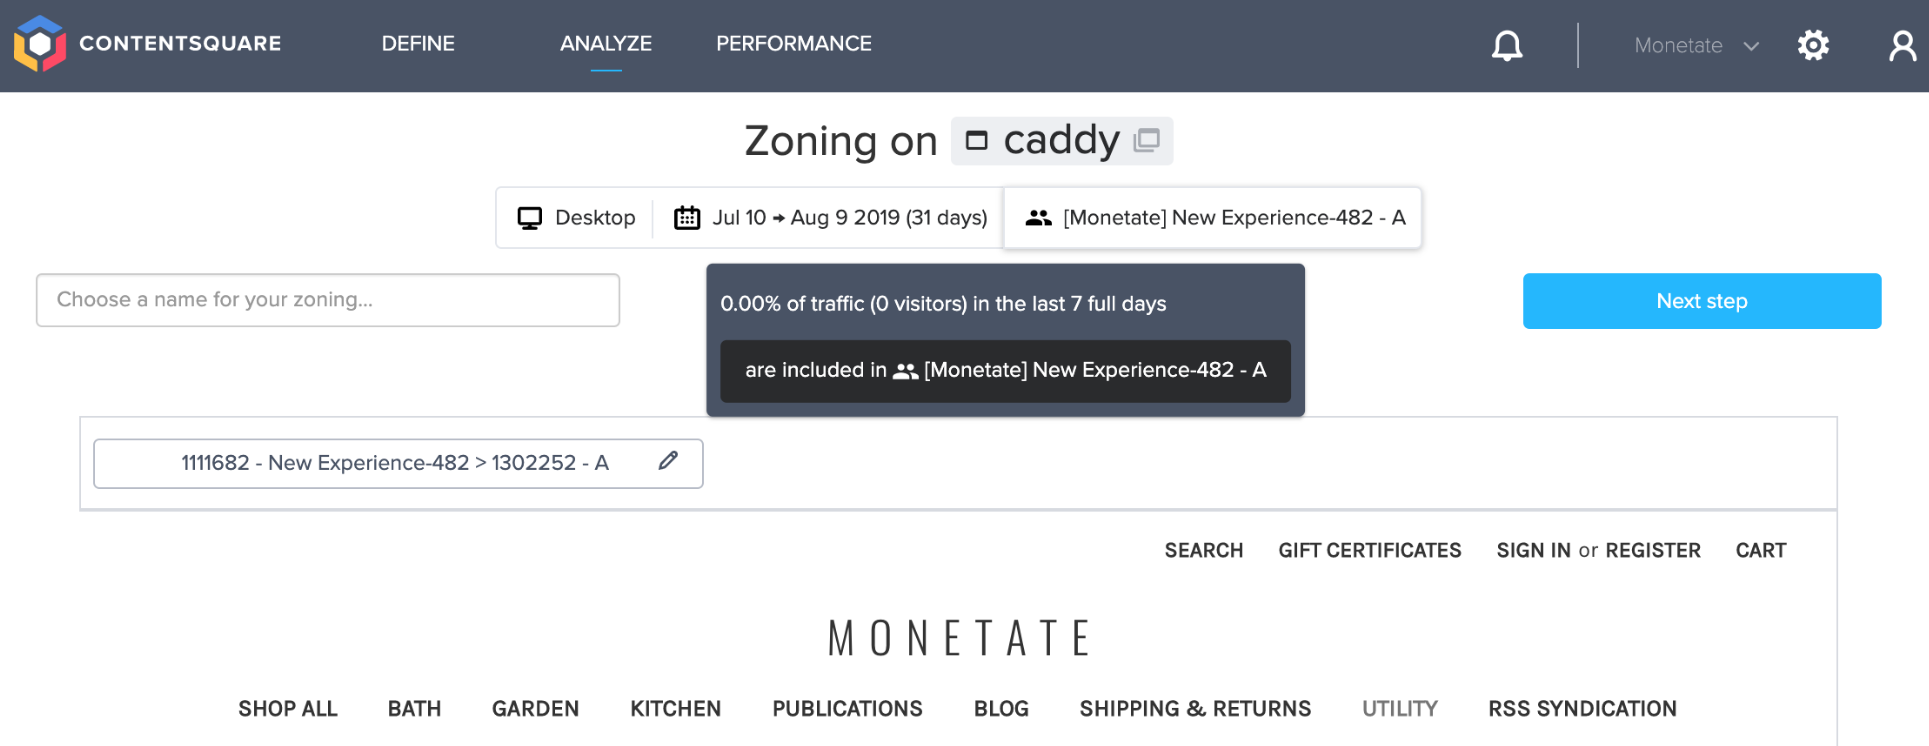 Contentsquare Zoning information overlaying a product detail page on which a Monetate experience is running